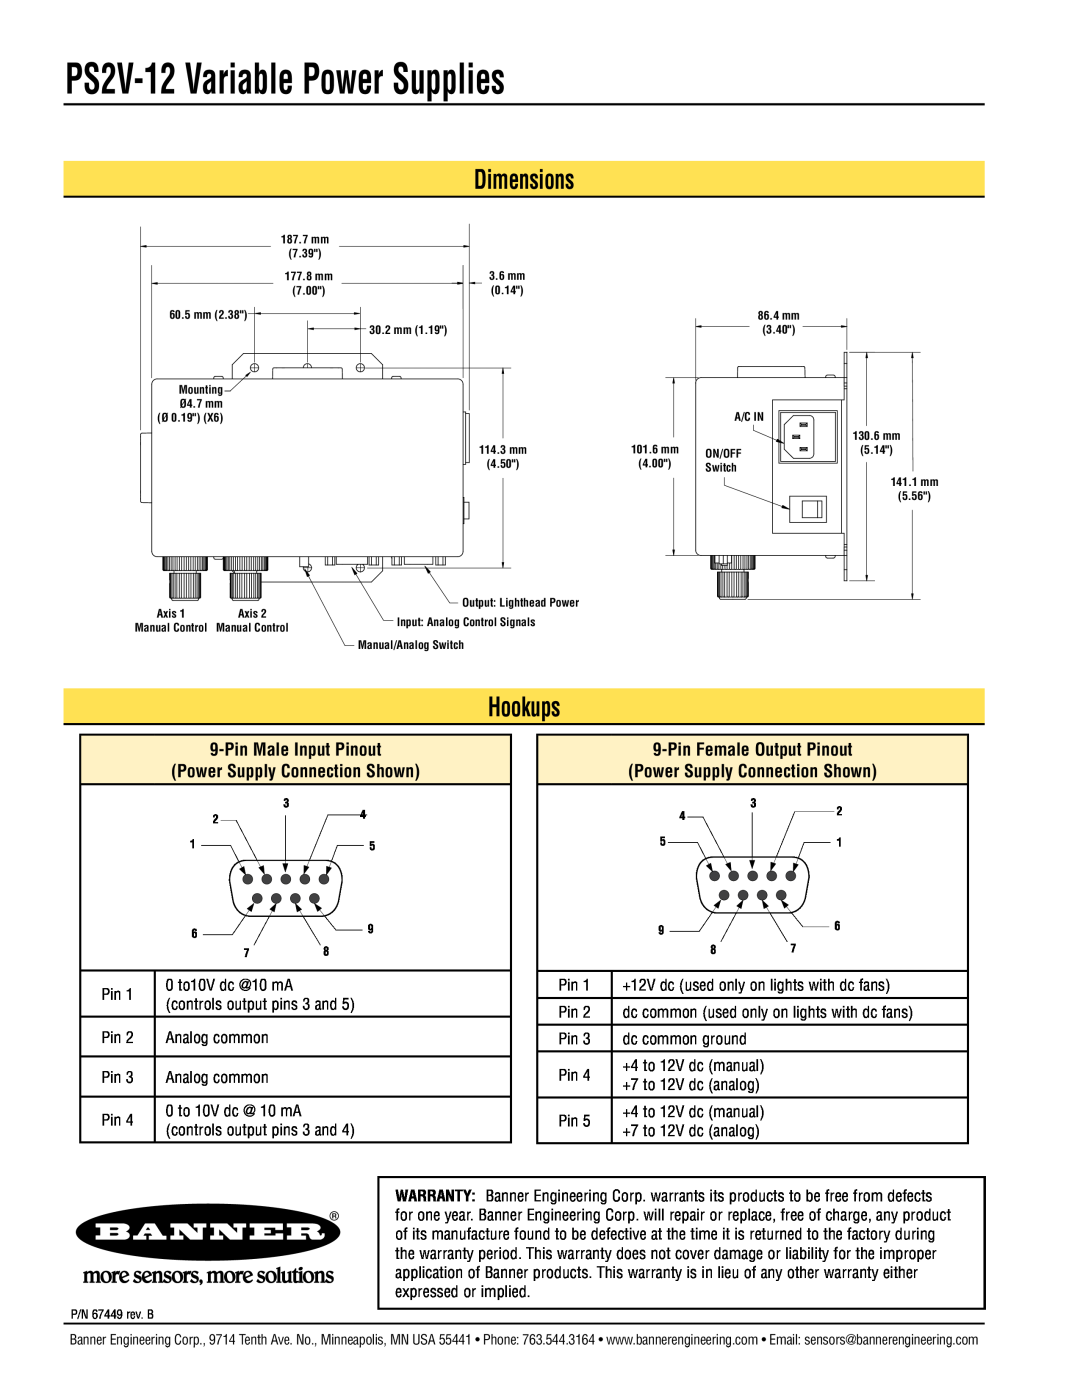 Banner Dimensions, Hookups, Pin Male Input Pinout Power Supply Connection Shown, PS2V-12 Variable Power Supplies 